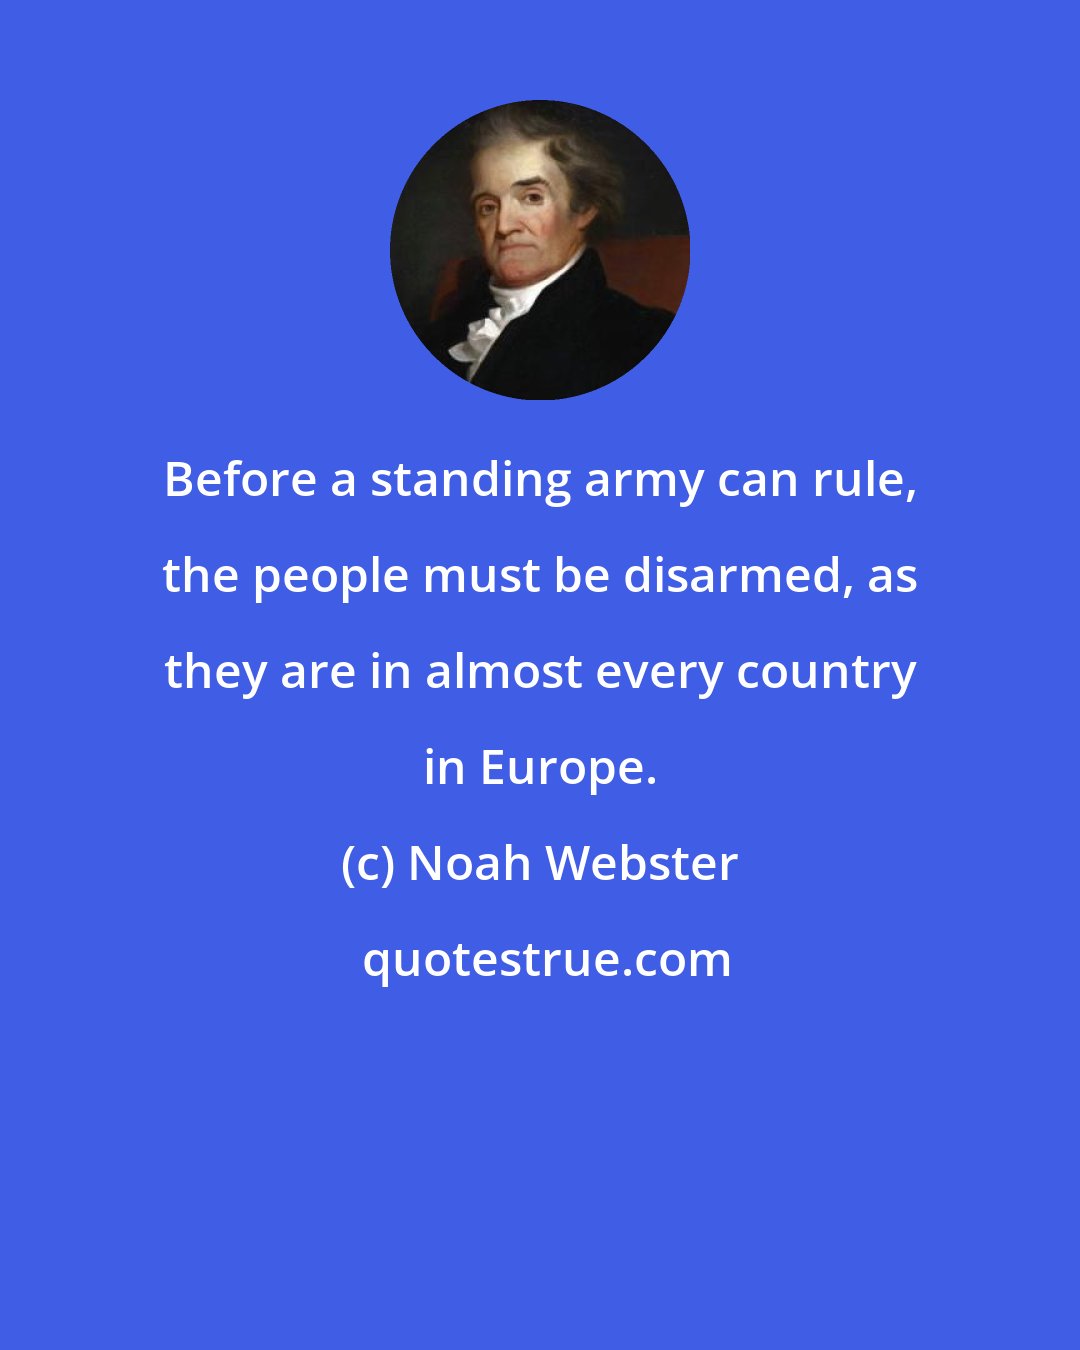 Noah Webster: Before a standing army can rule, the people must be disarmed, as they are in almost every country in Europe.